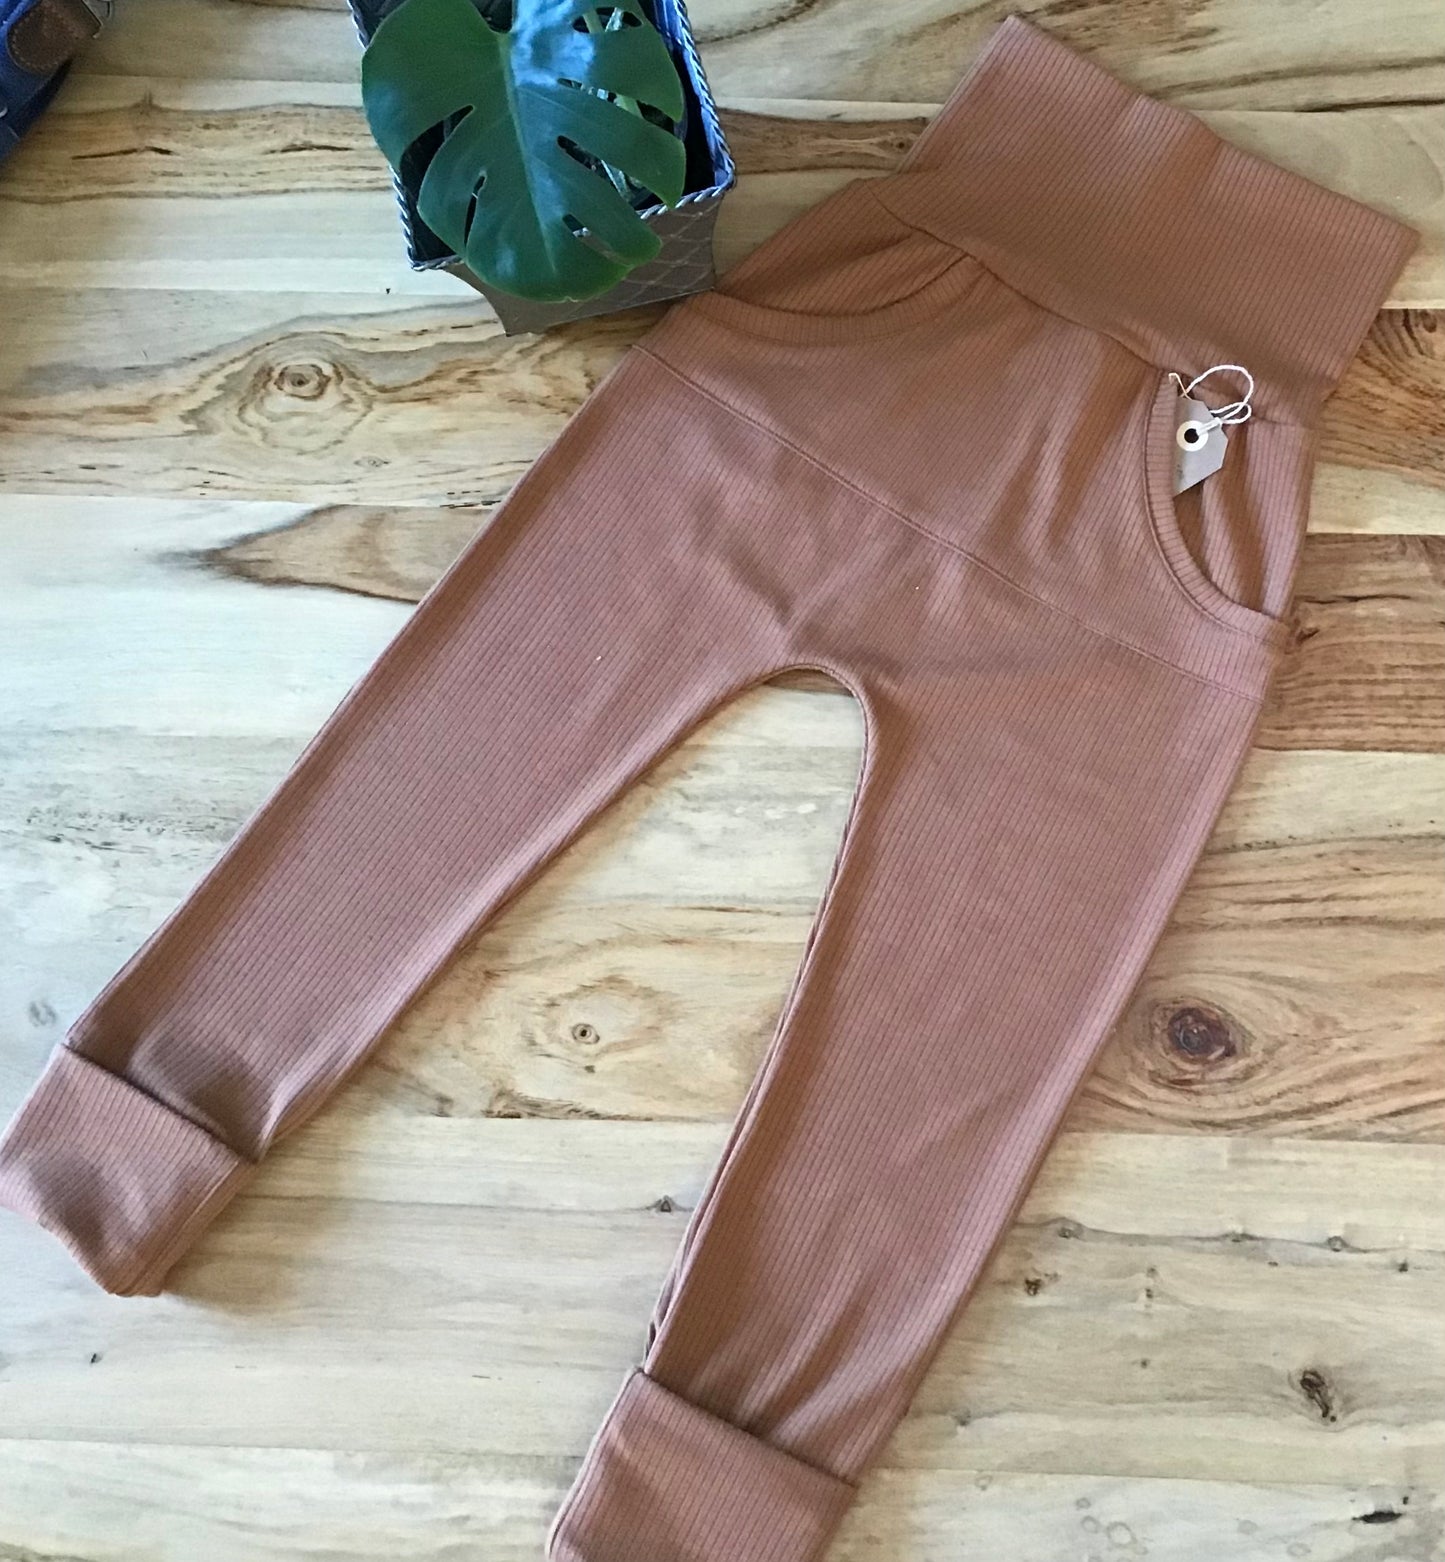 Harem pants with kangaroo pocket caramel color gr: 3 to 6 years ready to go